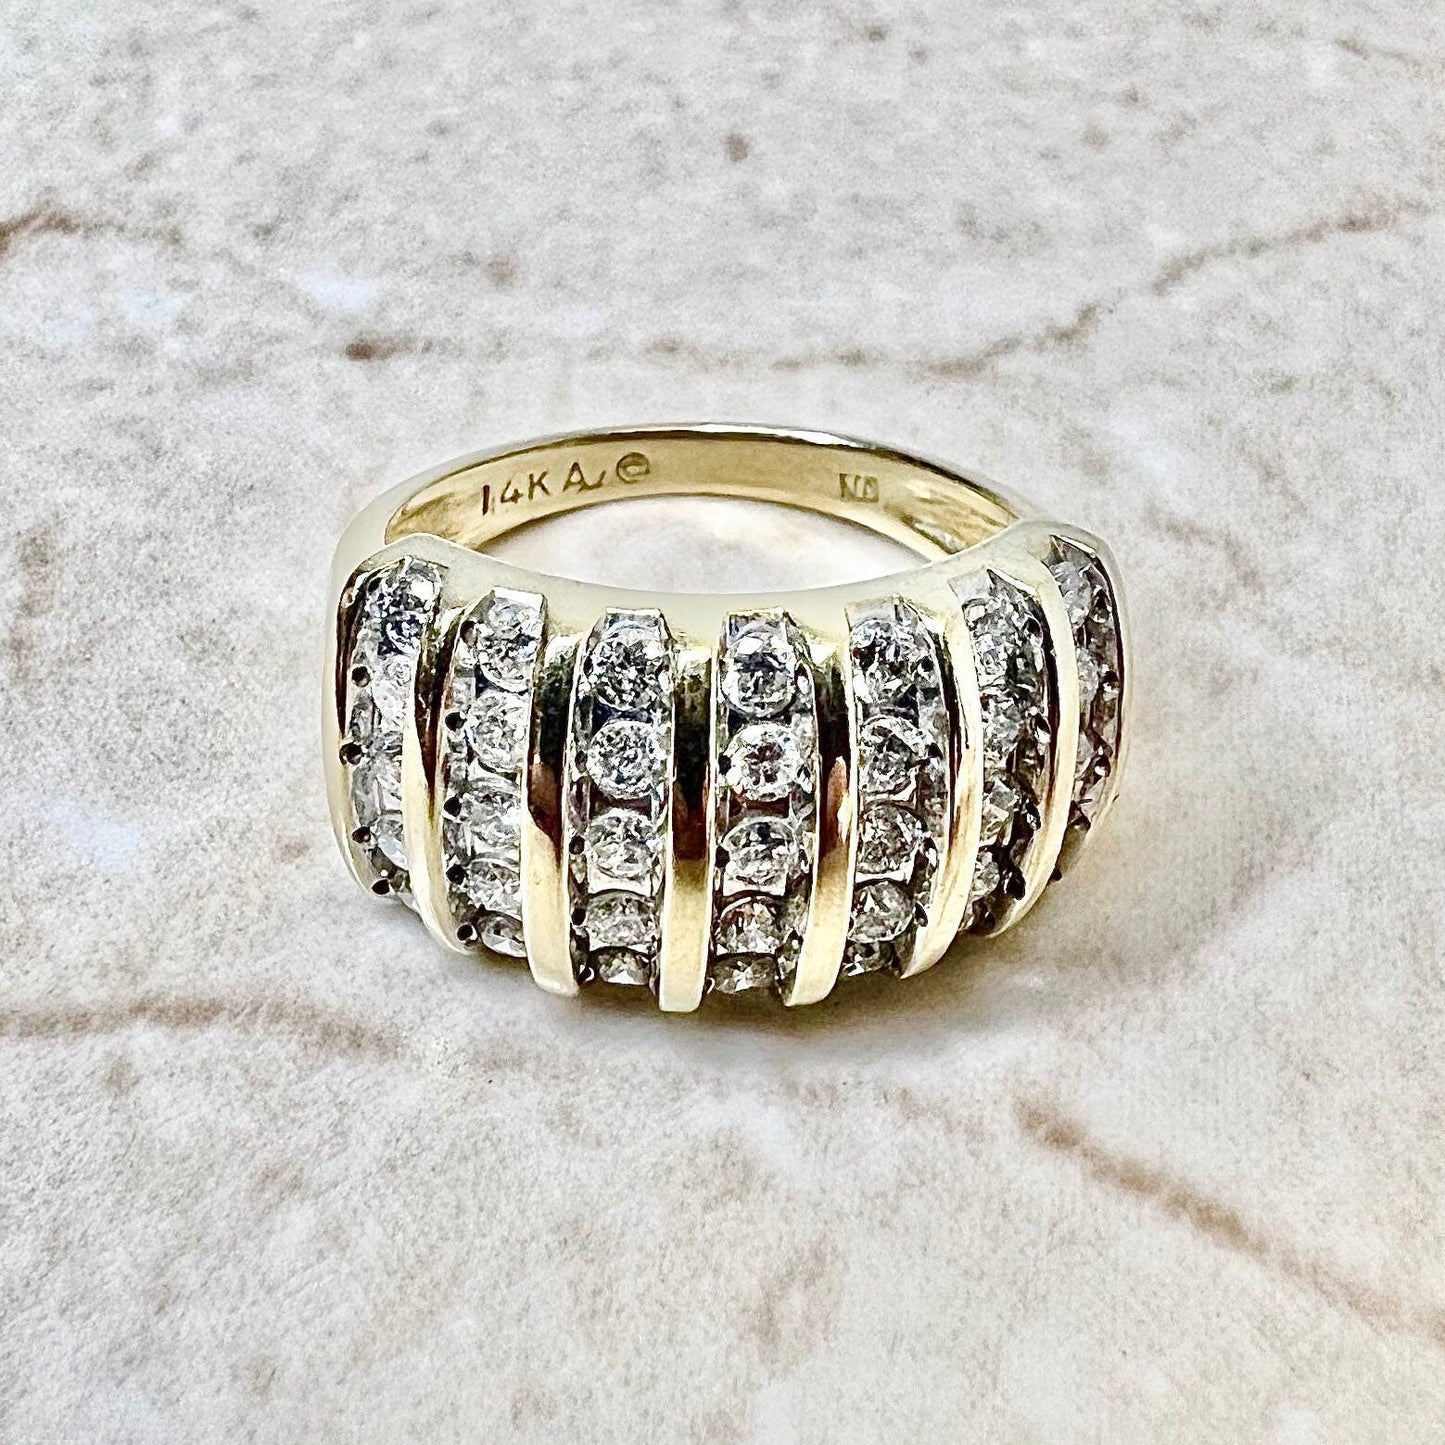 Wide 14K 5 Row Diamond Band Ring - Vintage Yellow Gold Cocktail Ring - Wedding Ring - Anniversary Ring - Best Gift For Her - Birthday Gift